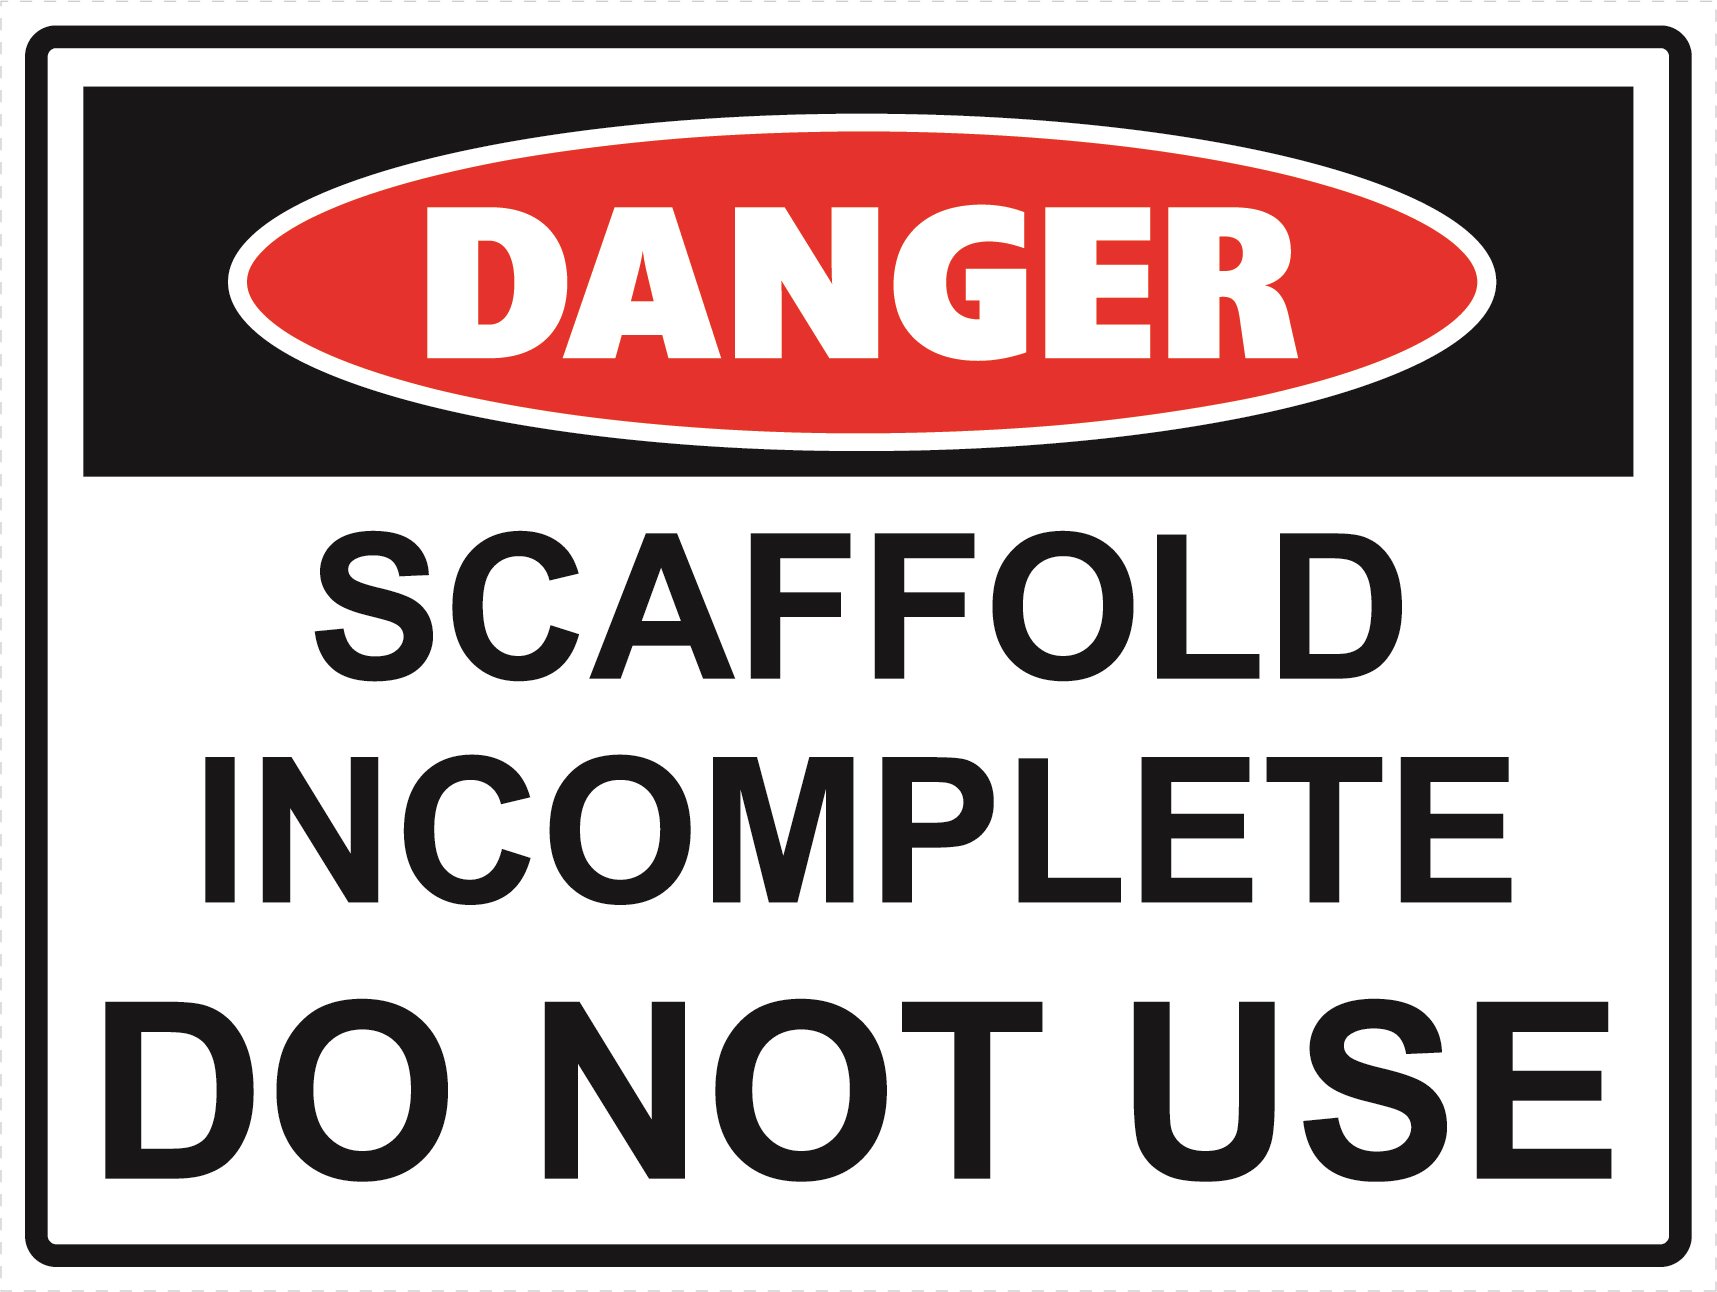 Danger - Scaffold Incomplete - Do Not Use